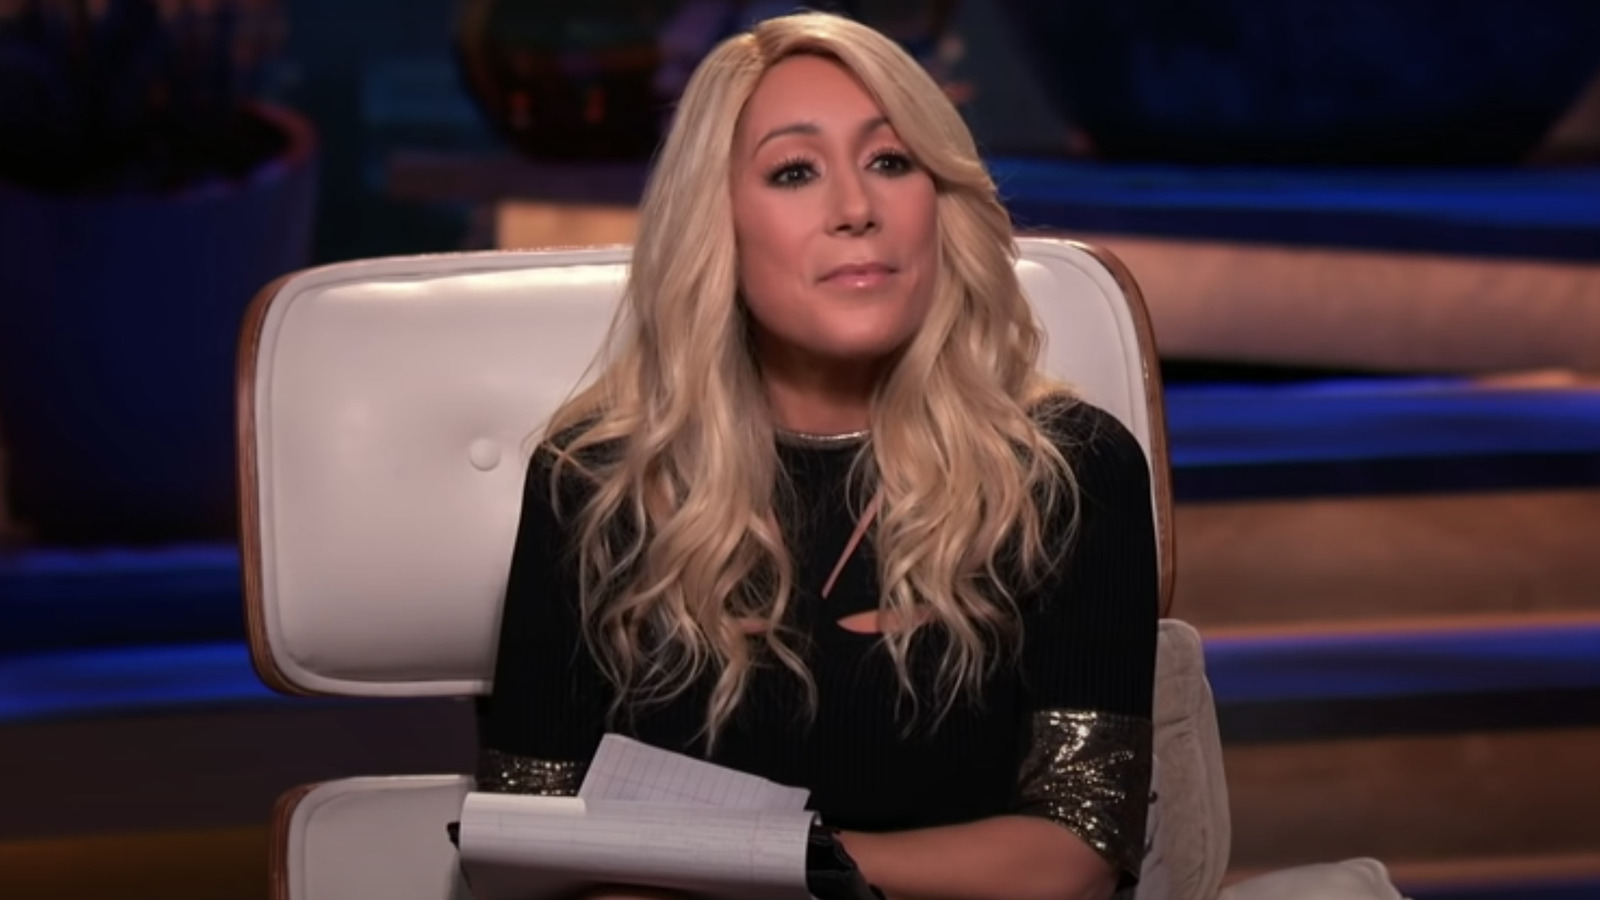 https://www.looper.com/img/gallery/shark-tank-lori-greiner-is-the-least-likely-to-close-a-deal-according-to-forbes/l-intro-1678401336.jpg